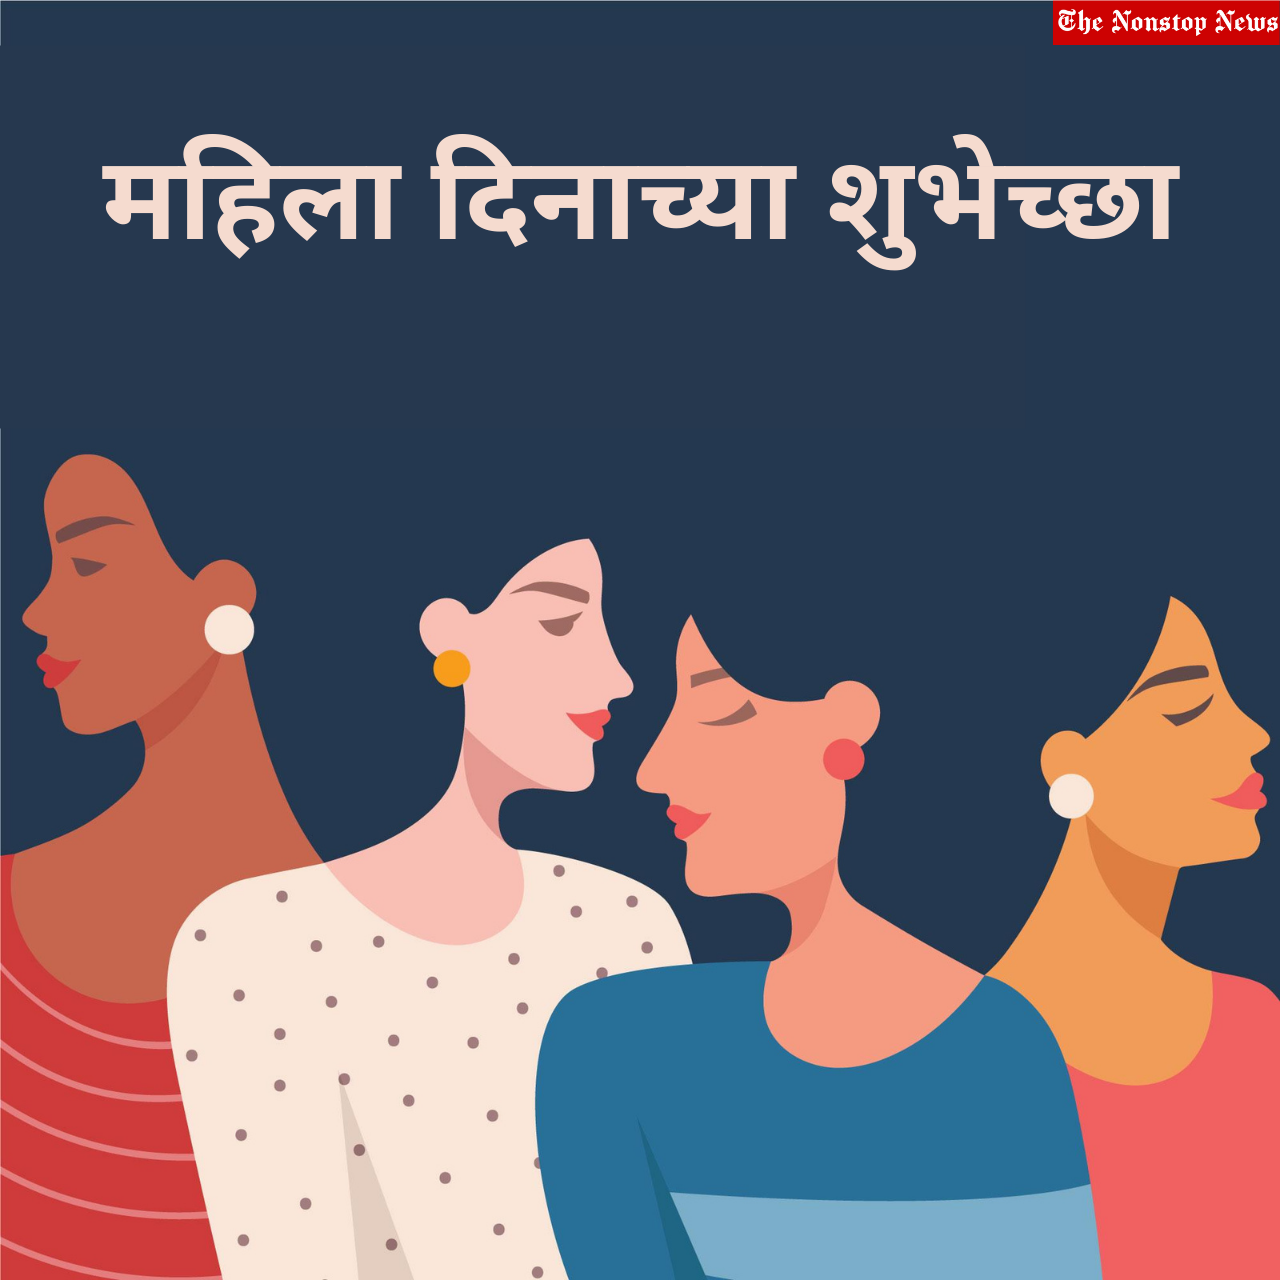 Happy Women's Day 2022 Marathi Quotes, Greetings, Wishes, Messages, Images, Shayari to Share